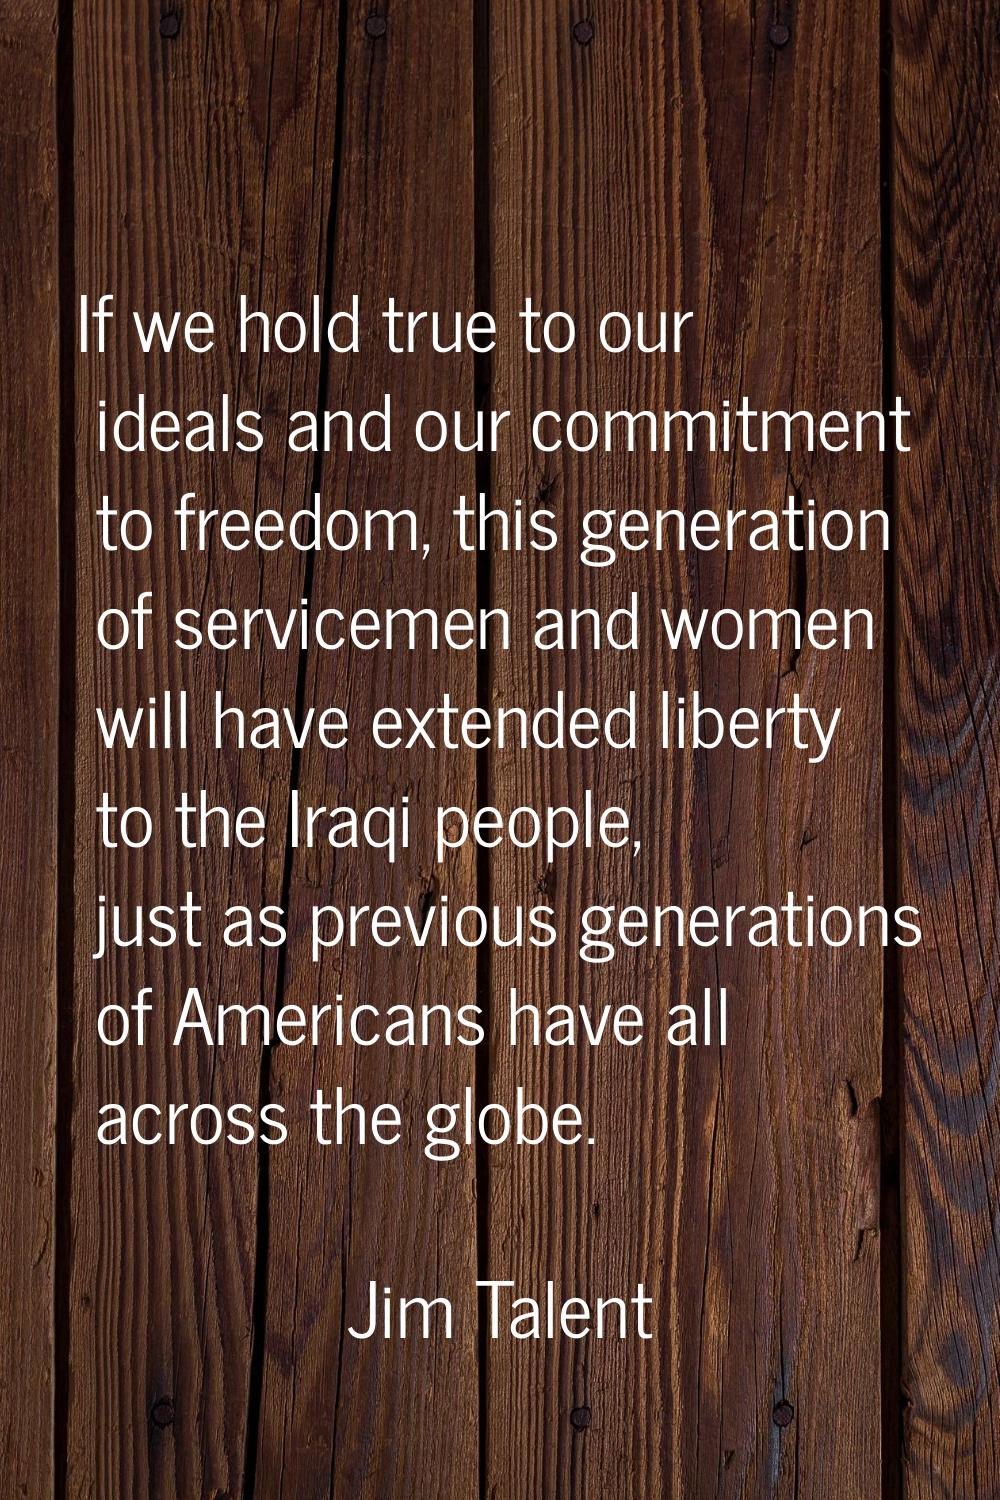 If we hold true to our ideals and our commitment to freedom, this generation of servicemen and wome